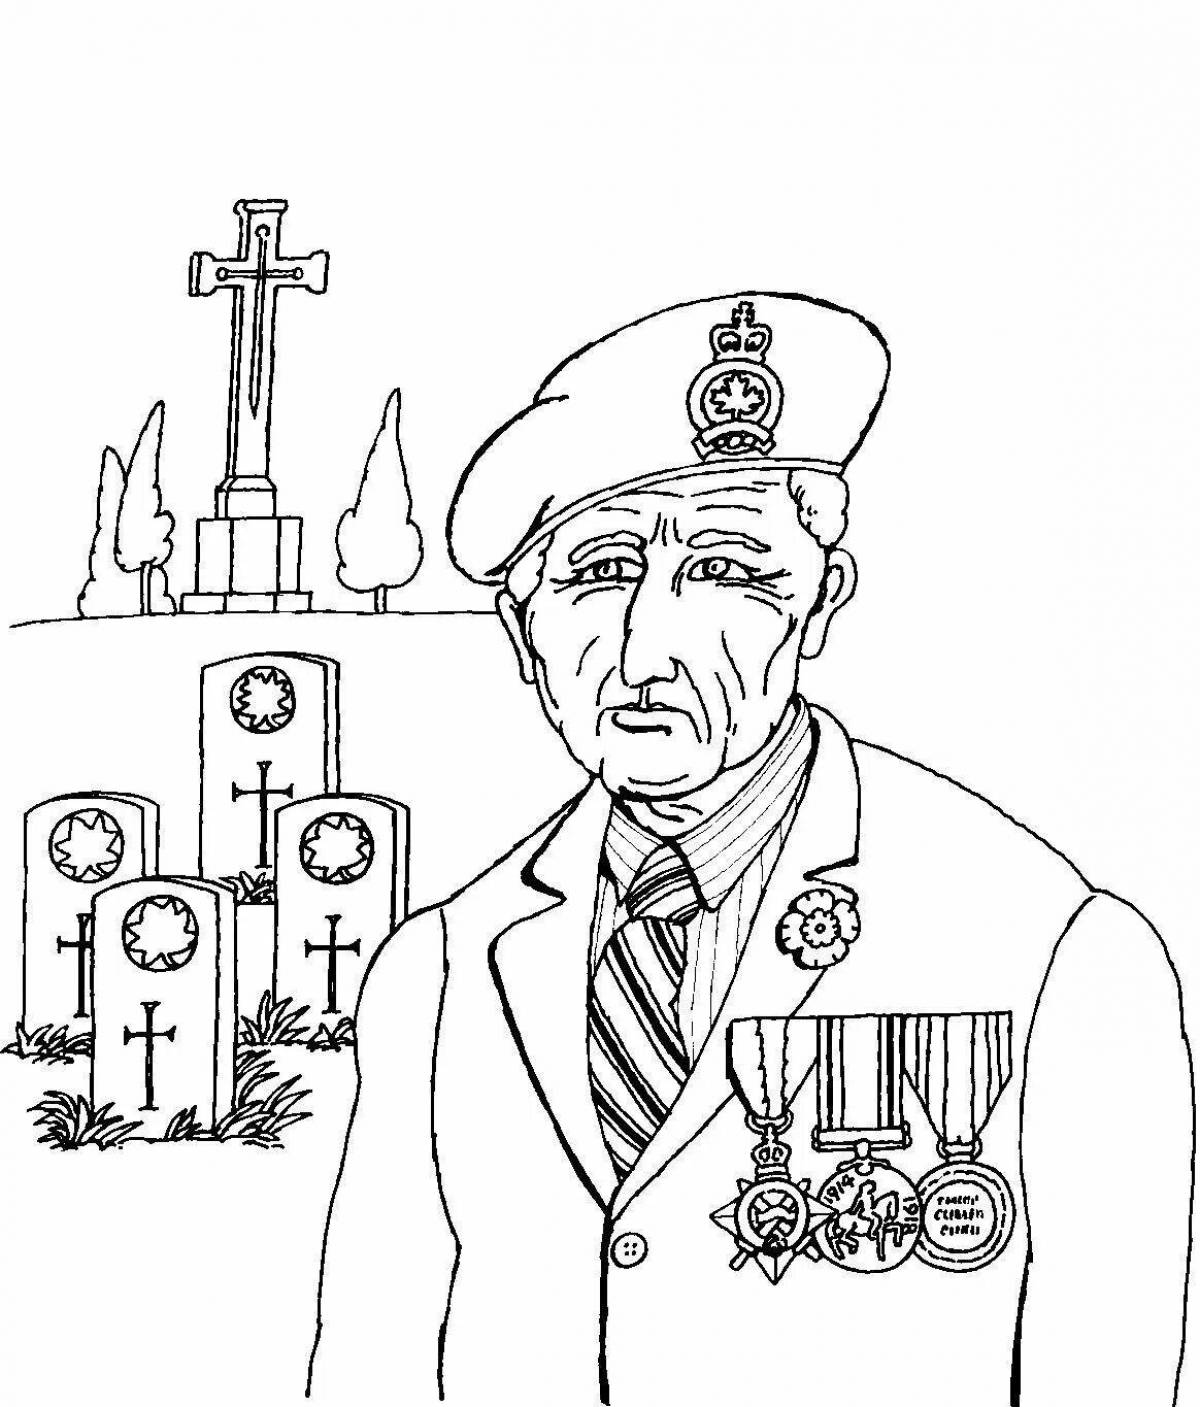 Coloring book heroes of the great war